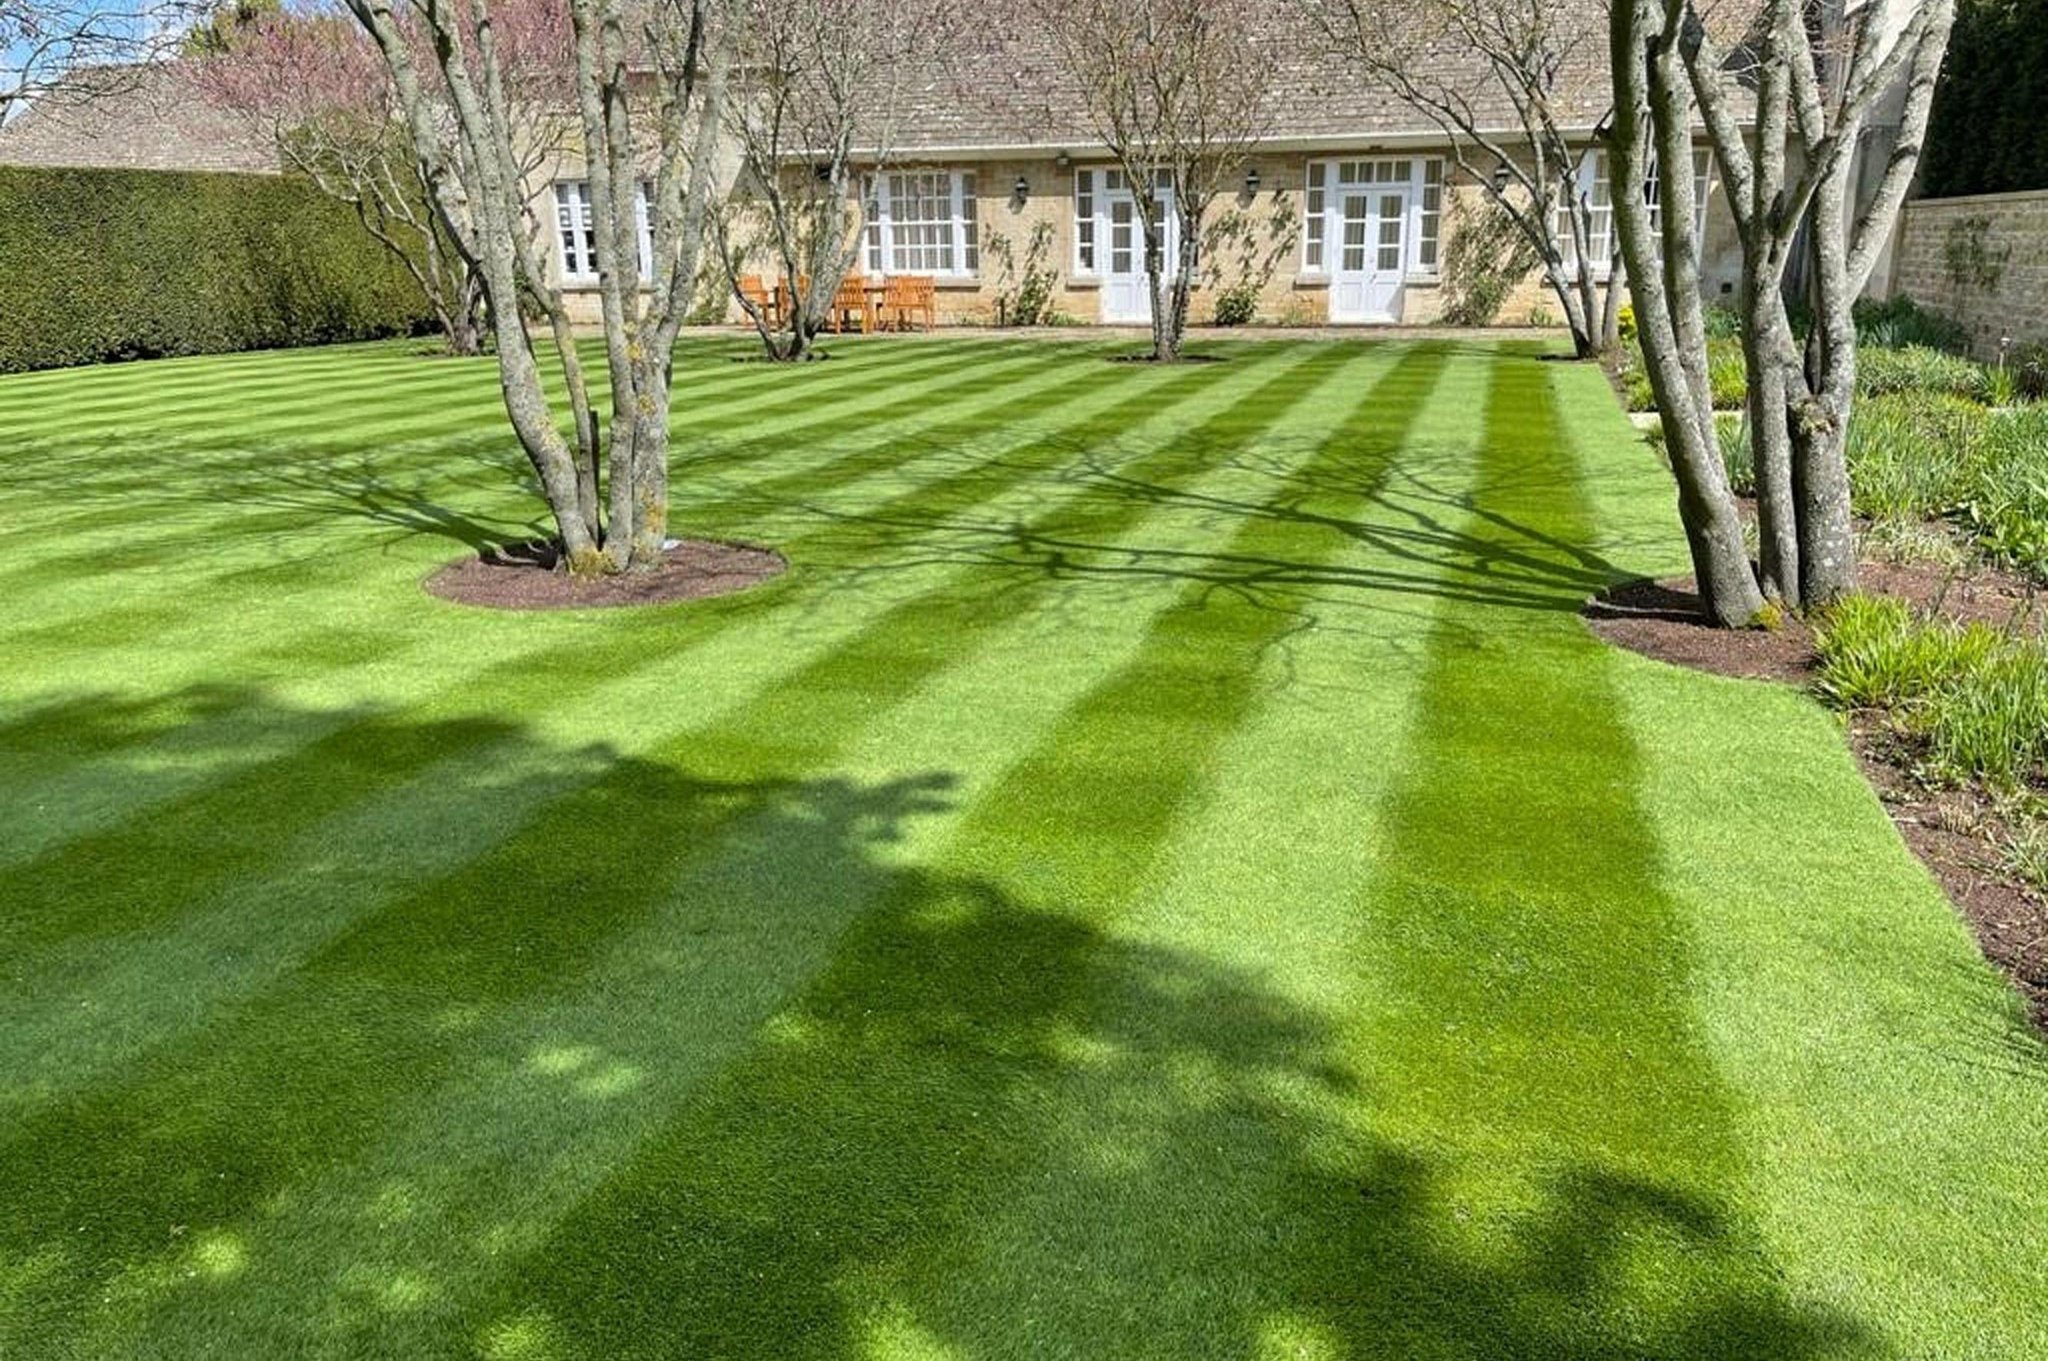 Follow these steps for a Wimbledon lawn